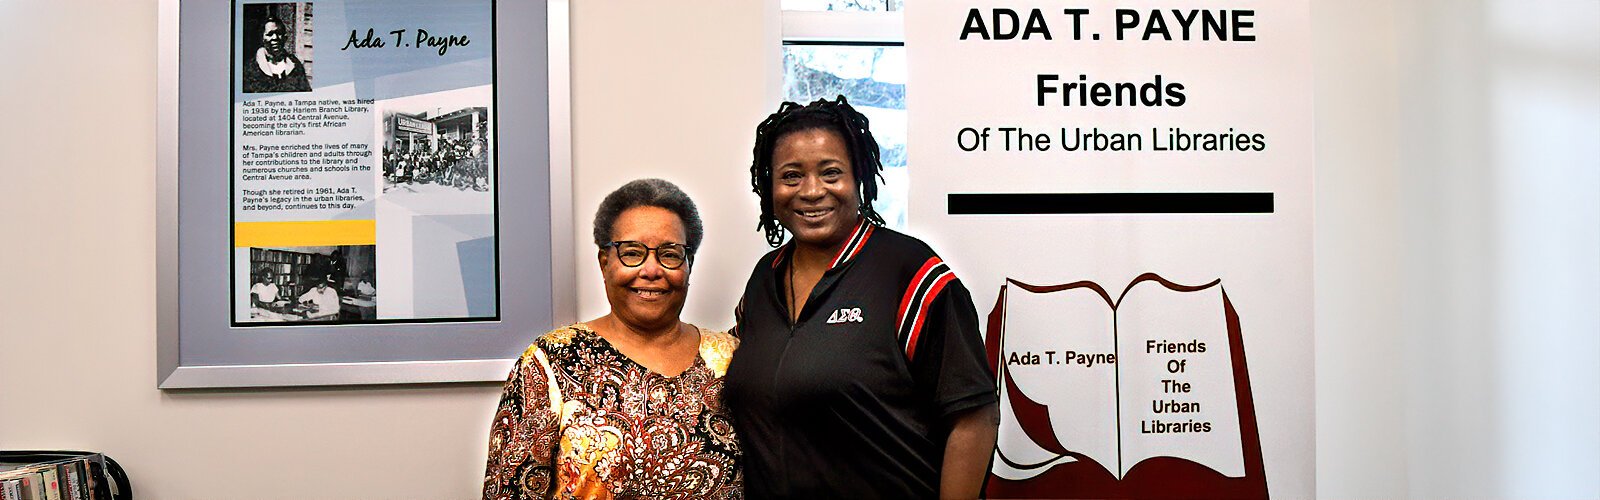 Mary M. James, President of Ada T. Payne Friends of the Urban Libraries, and volunteer Darlene Harris pose in front of a write-up on Ada T. Payne, Tampa’s first African American librarian and Mary’s grandmother.